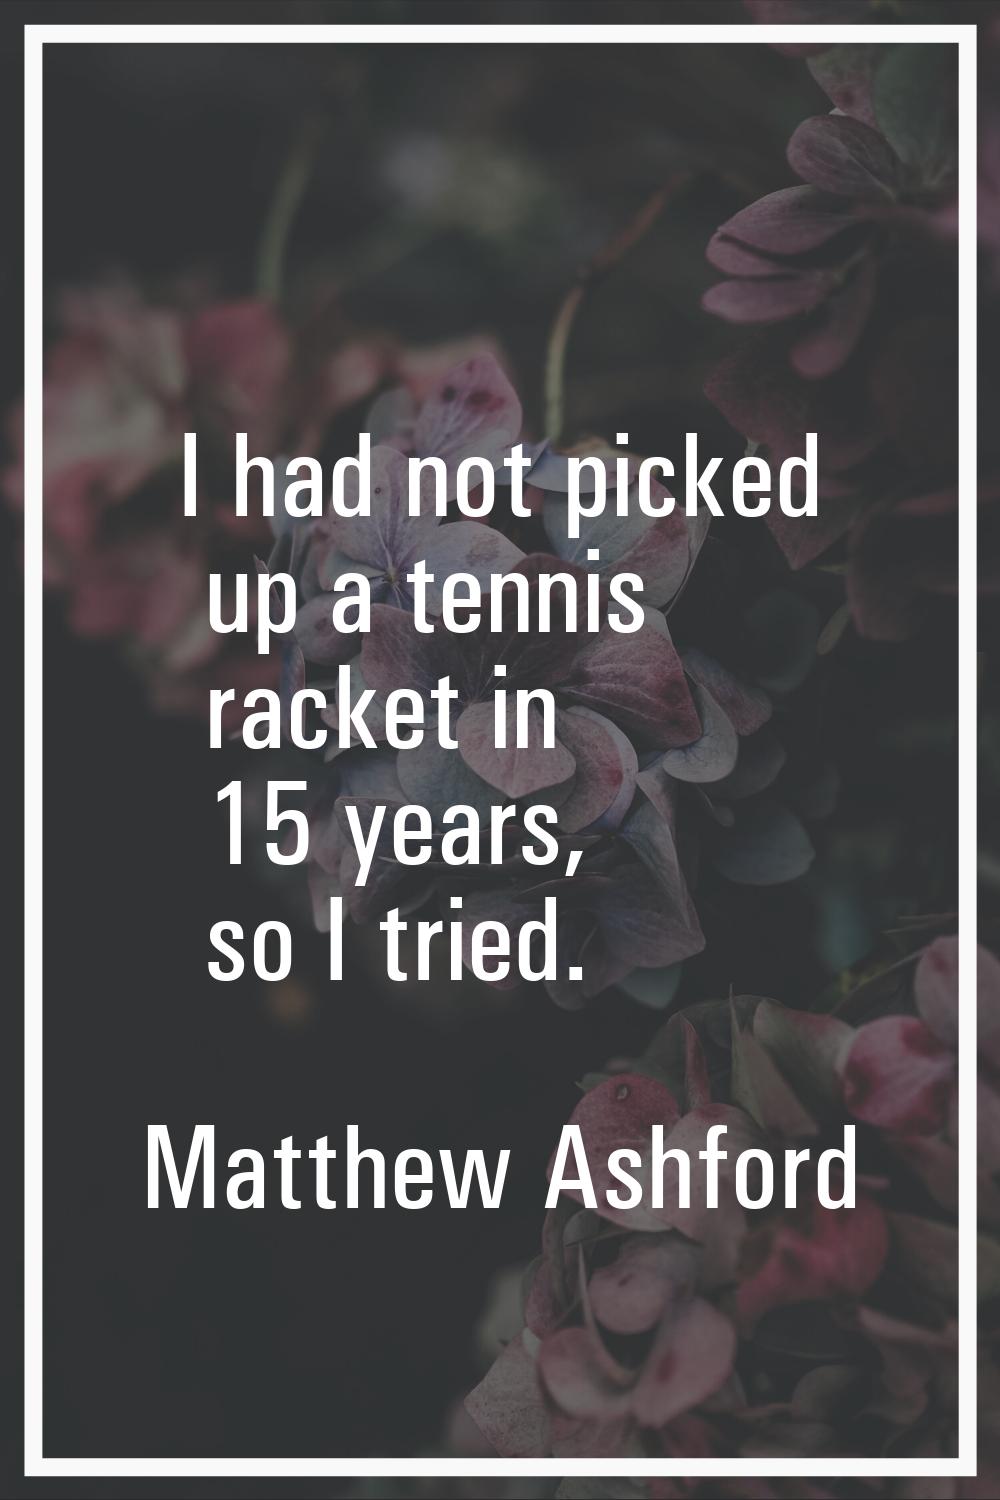 I had not picked up a tennis racket in 15 years, so I tried.